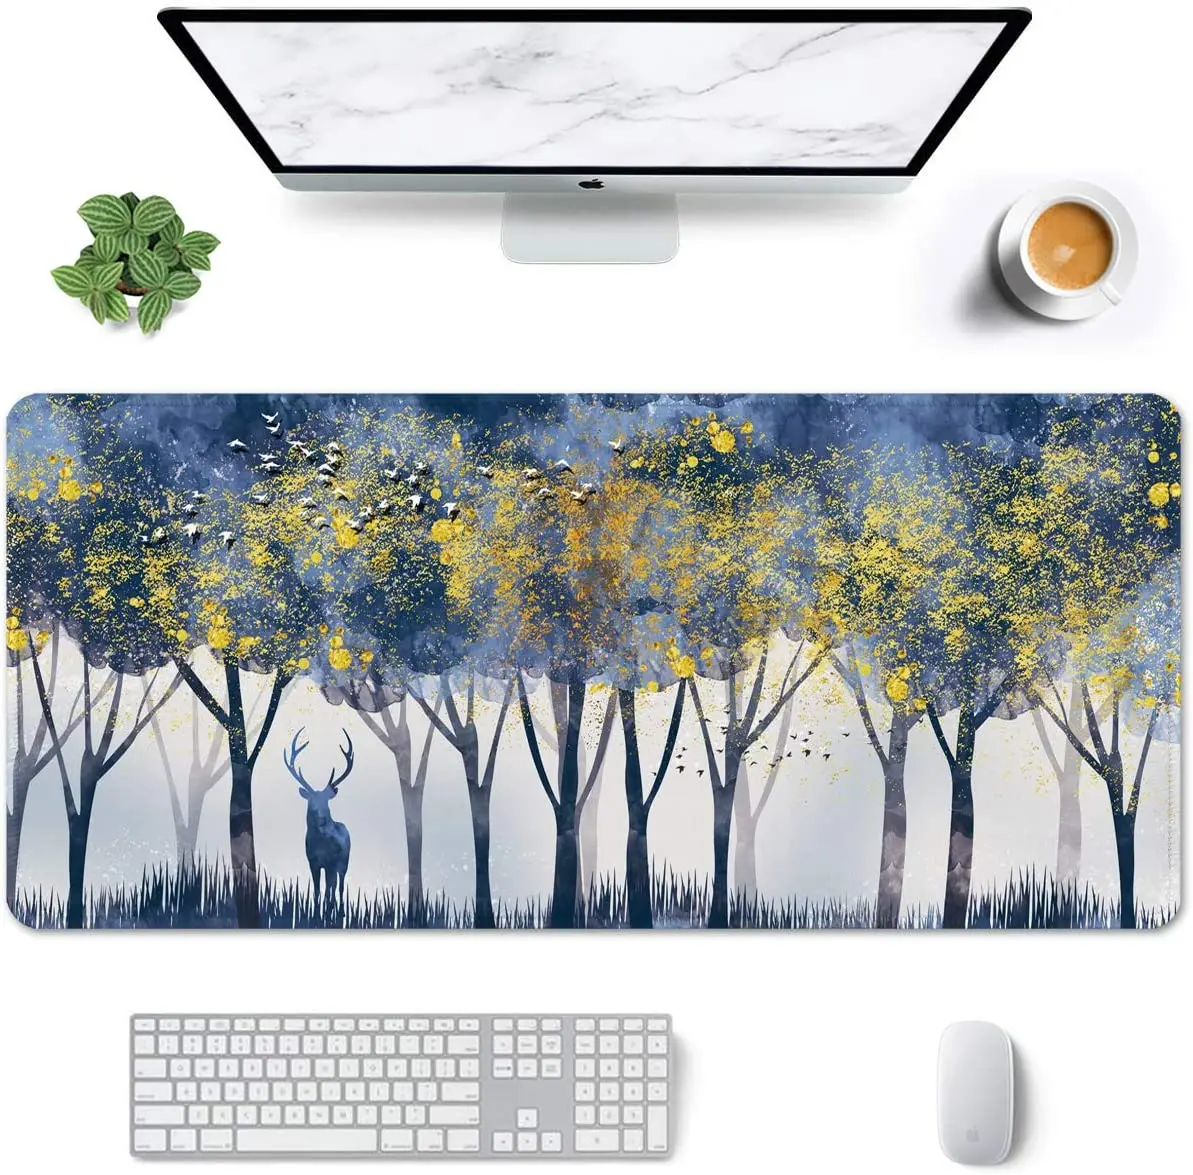 

Forest Deer Mouse Pad Full Desk XXL Extended Gaming Mouse Pad Waterproof Desk Mat with Stitched Edge Non-Slip Computer Mousepad